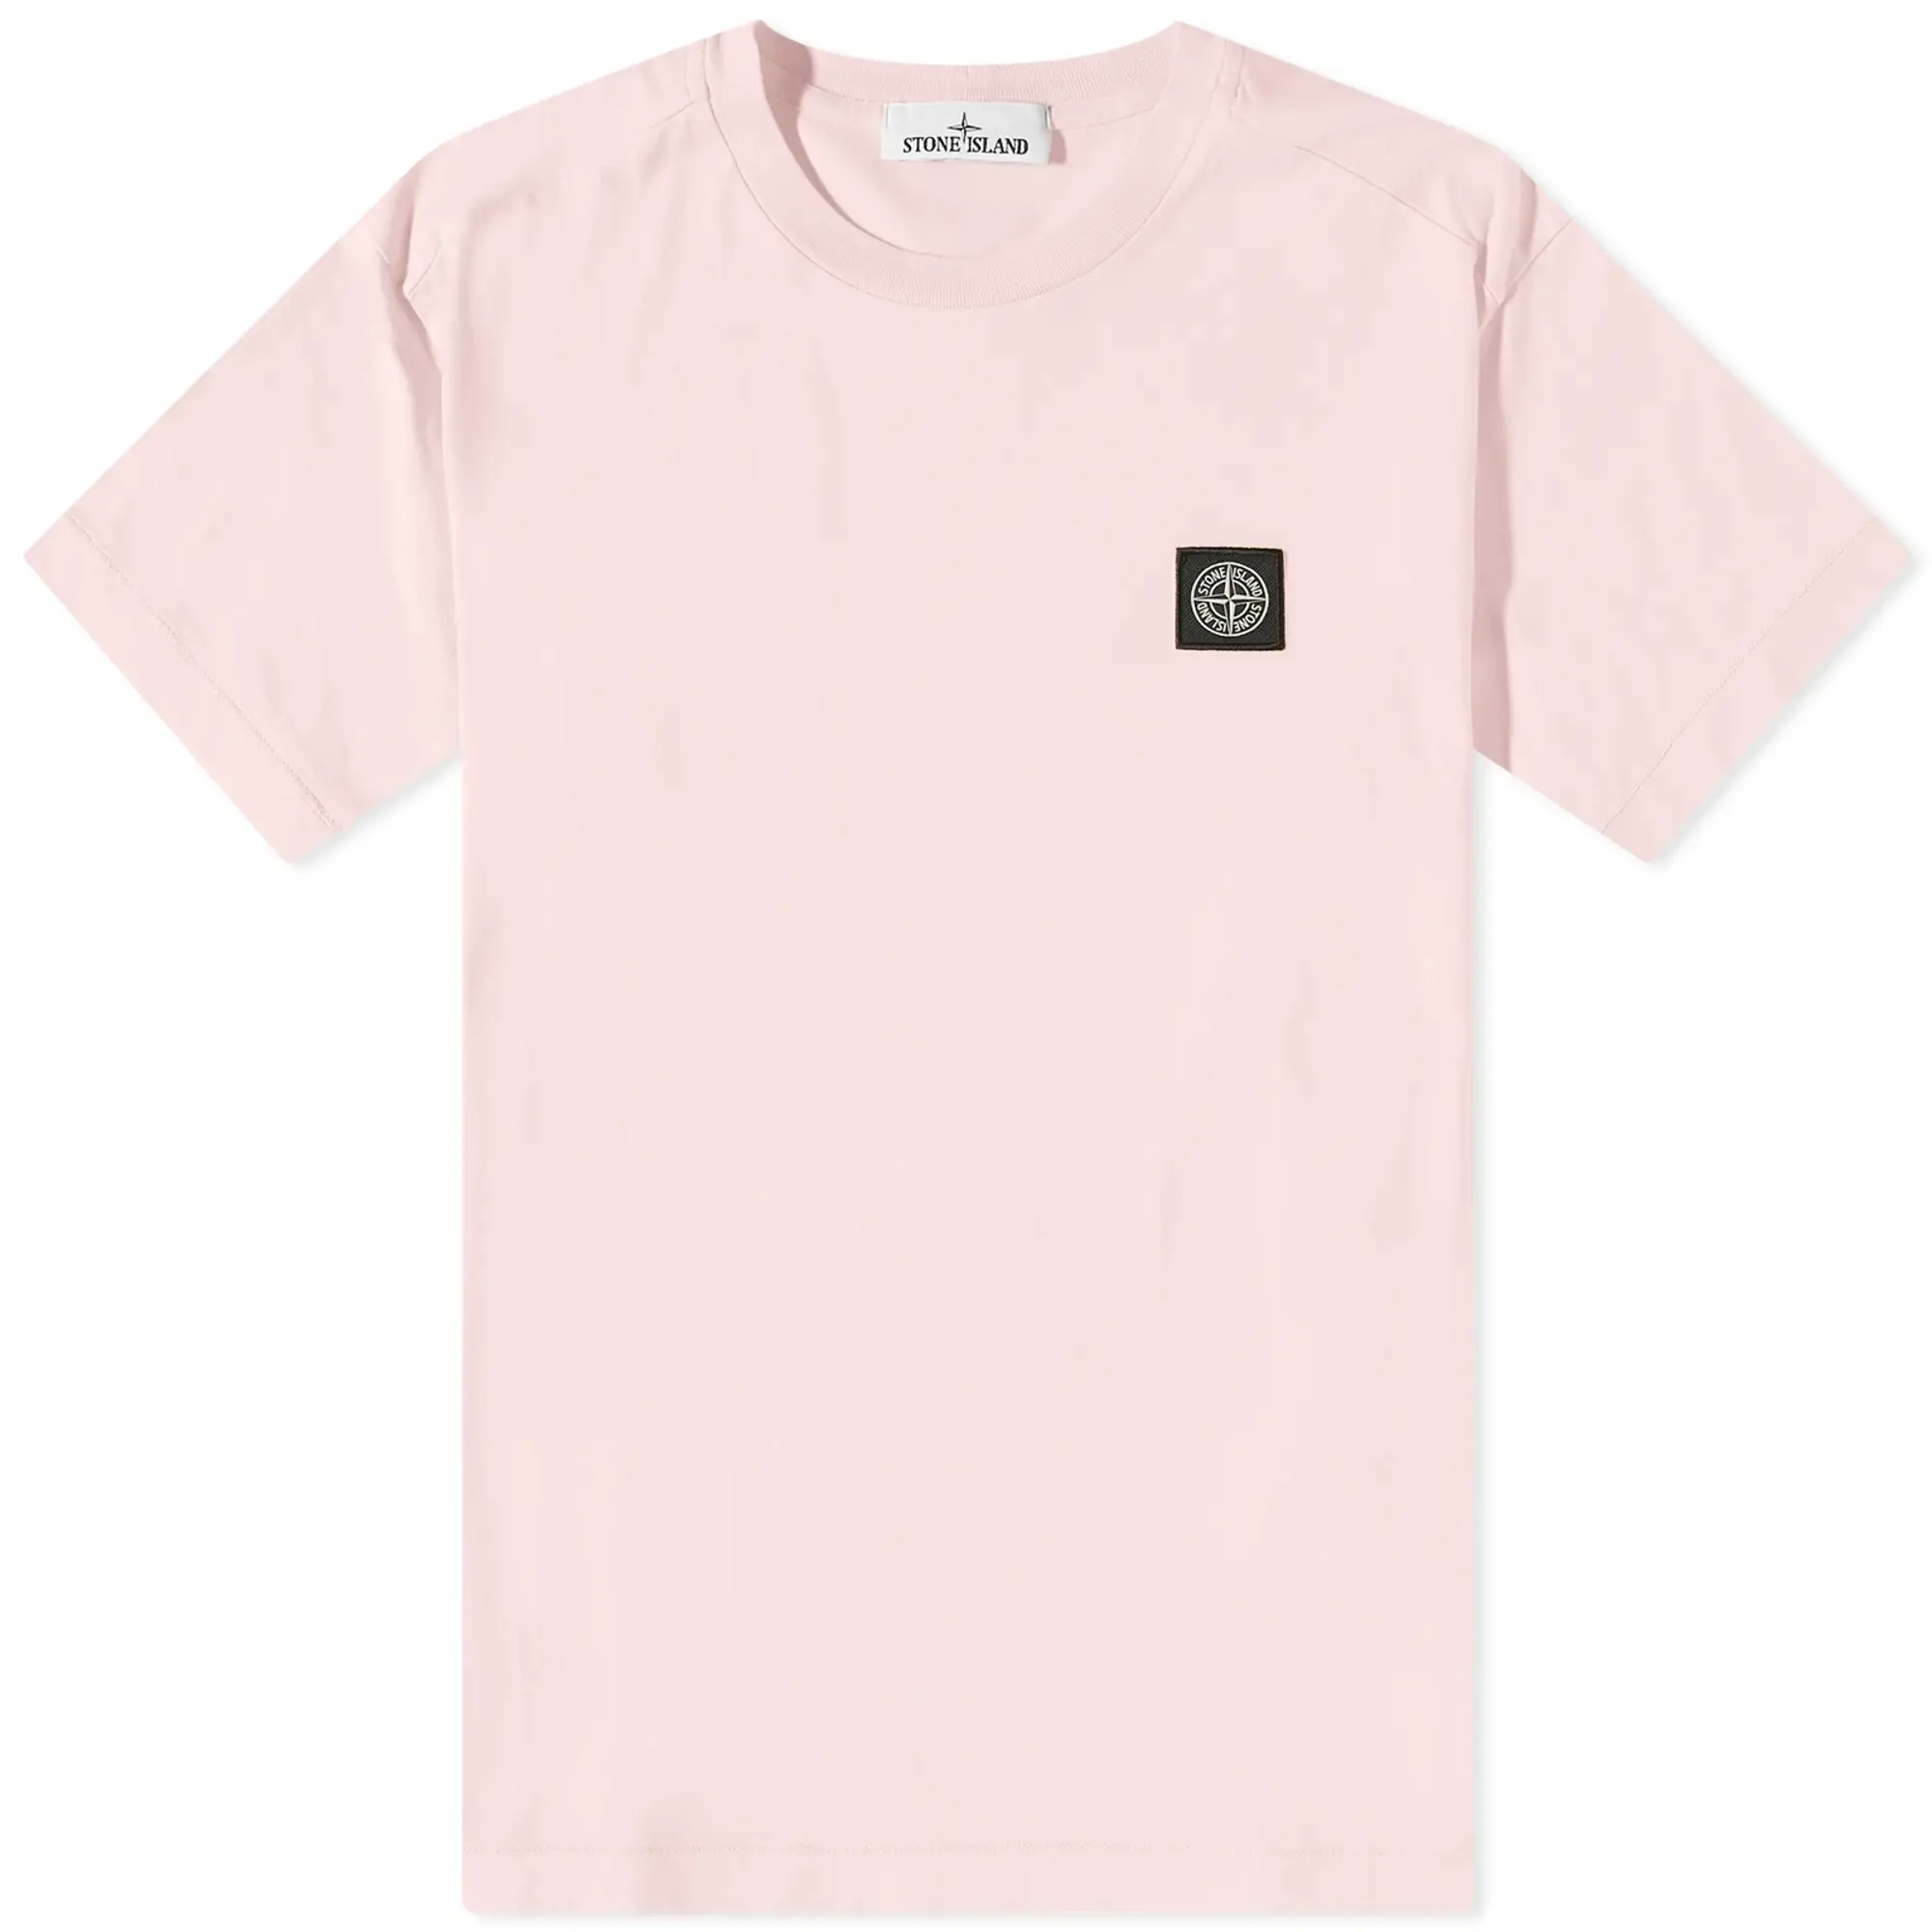 Stone Island Patch Tee Pink